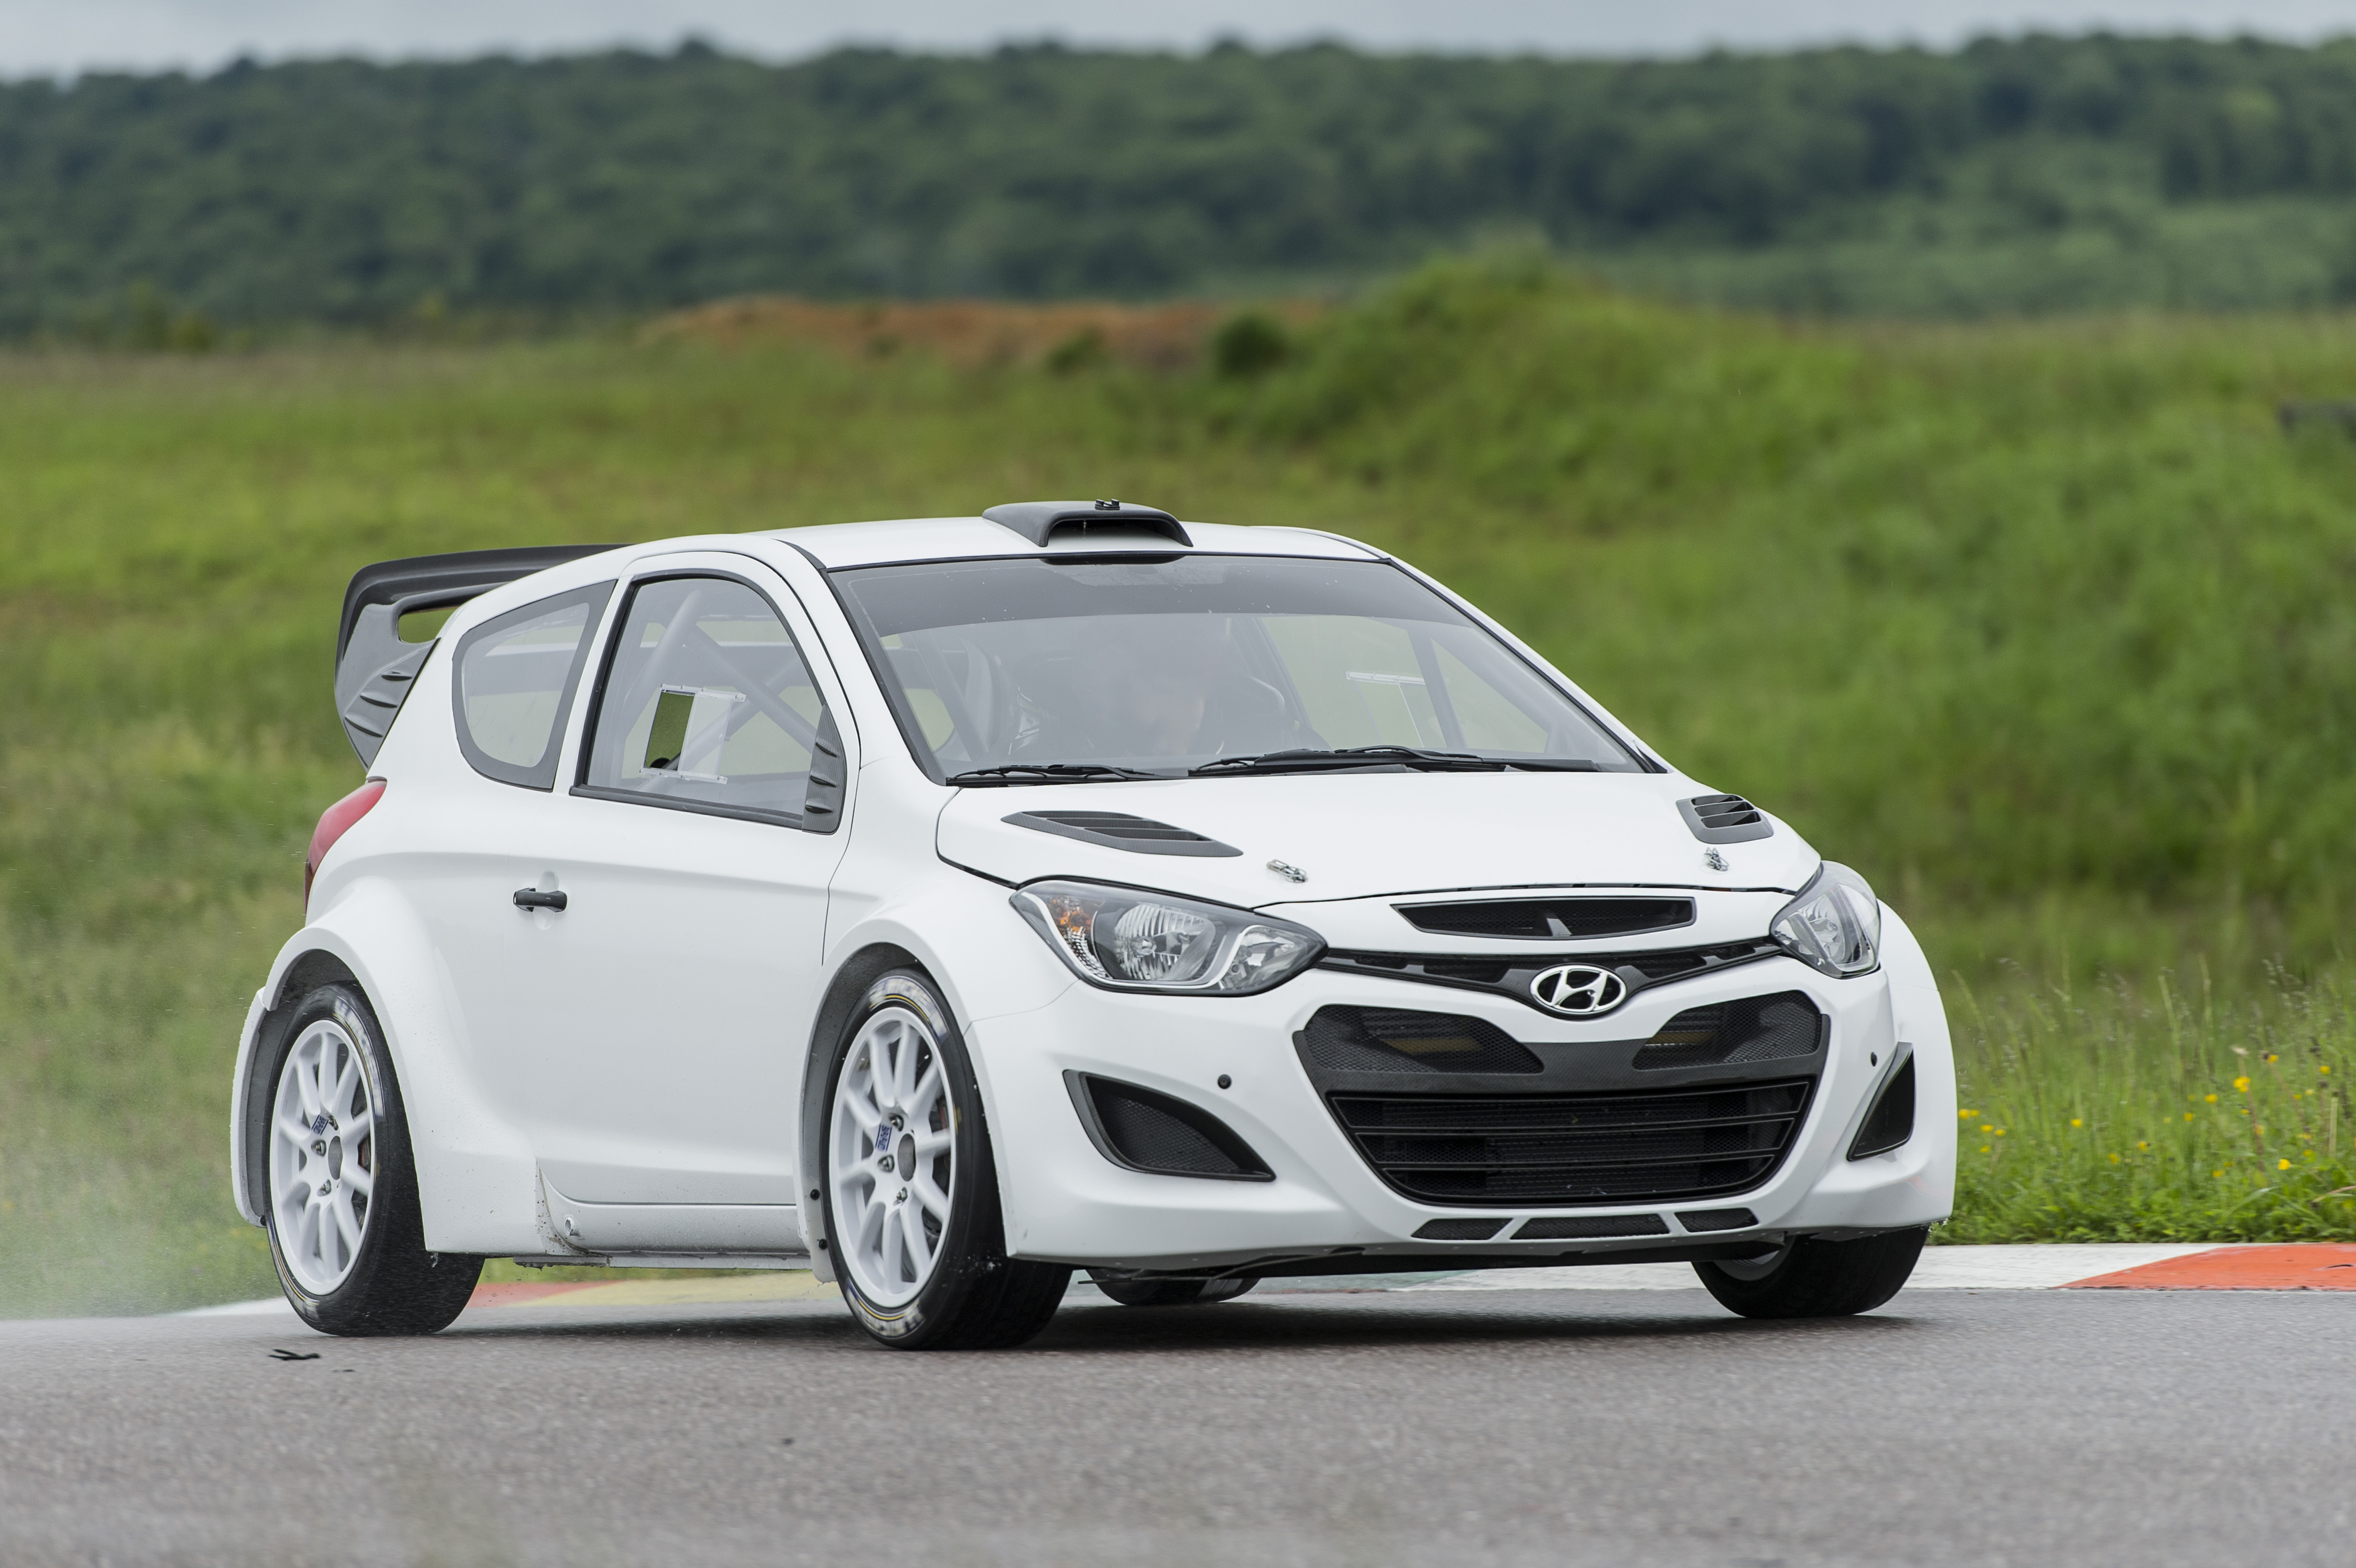 Hyundai i20 WRC car completes first test in lead up to 2014 season